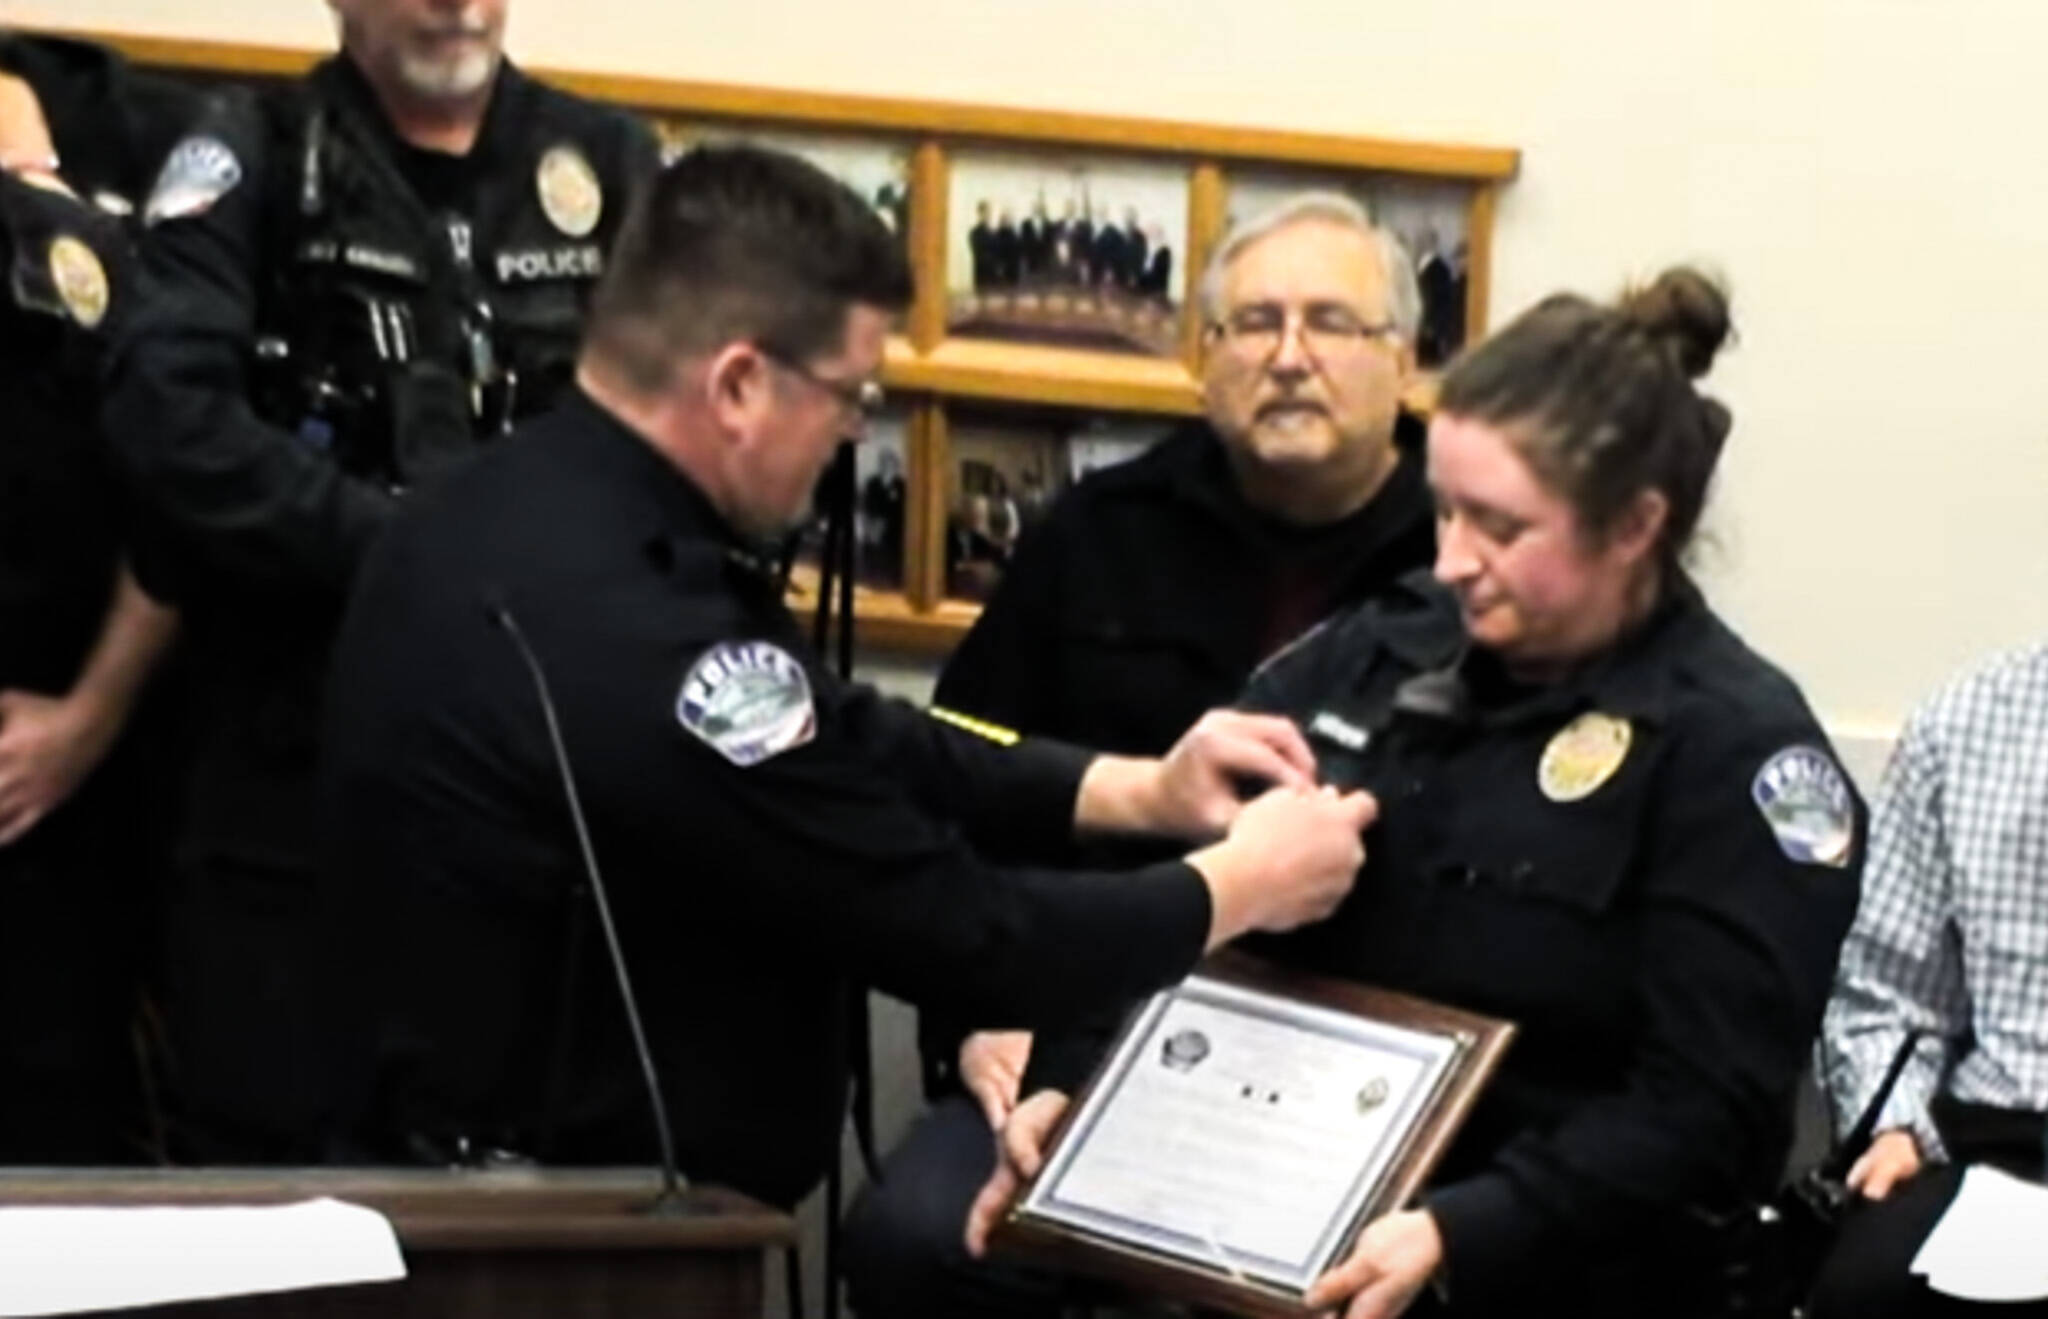 Oak Harbor Police Chief Tony Slowik (left) pins a commendation bar on Officer Claire Herrera's uniform for saving a child's life. (Photo courtesy of the City of Oak Harbor)